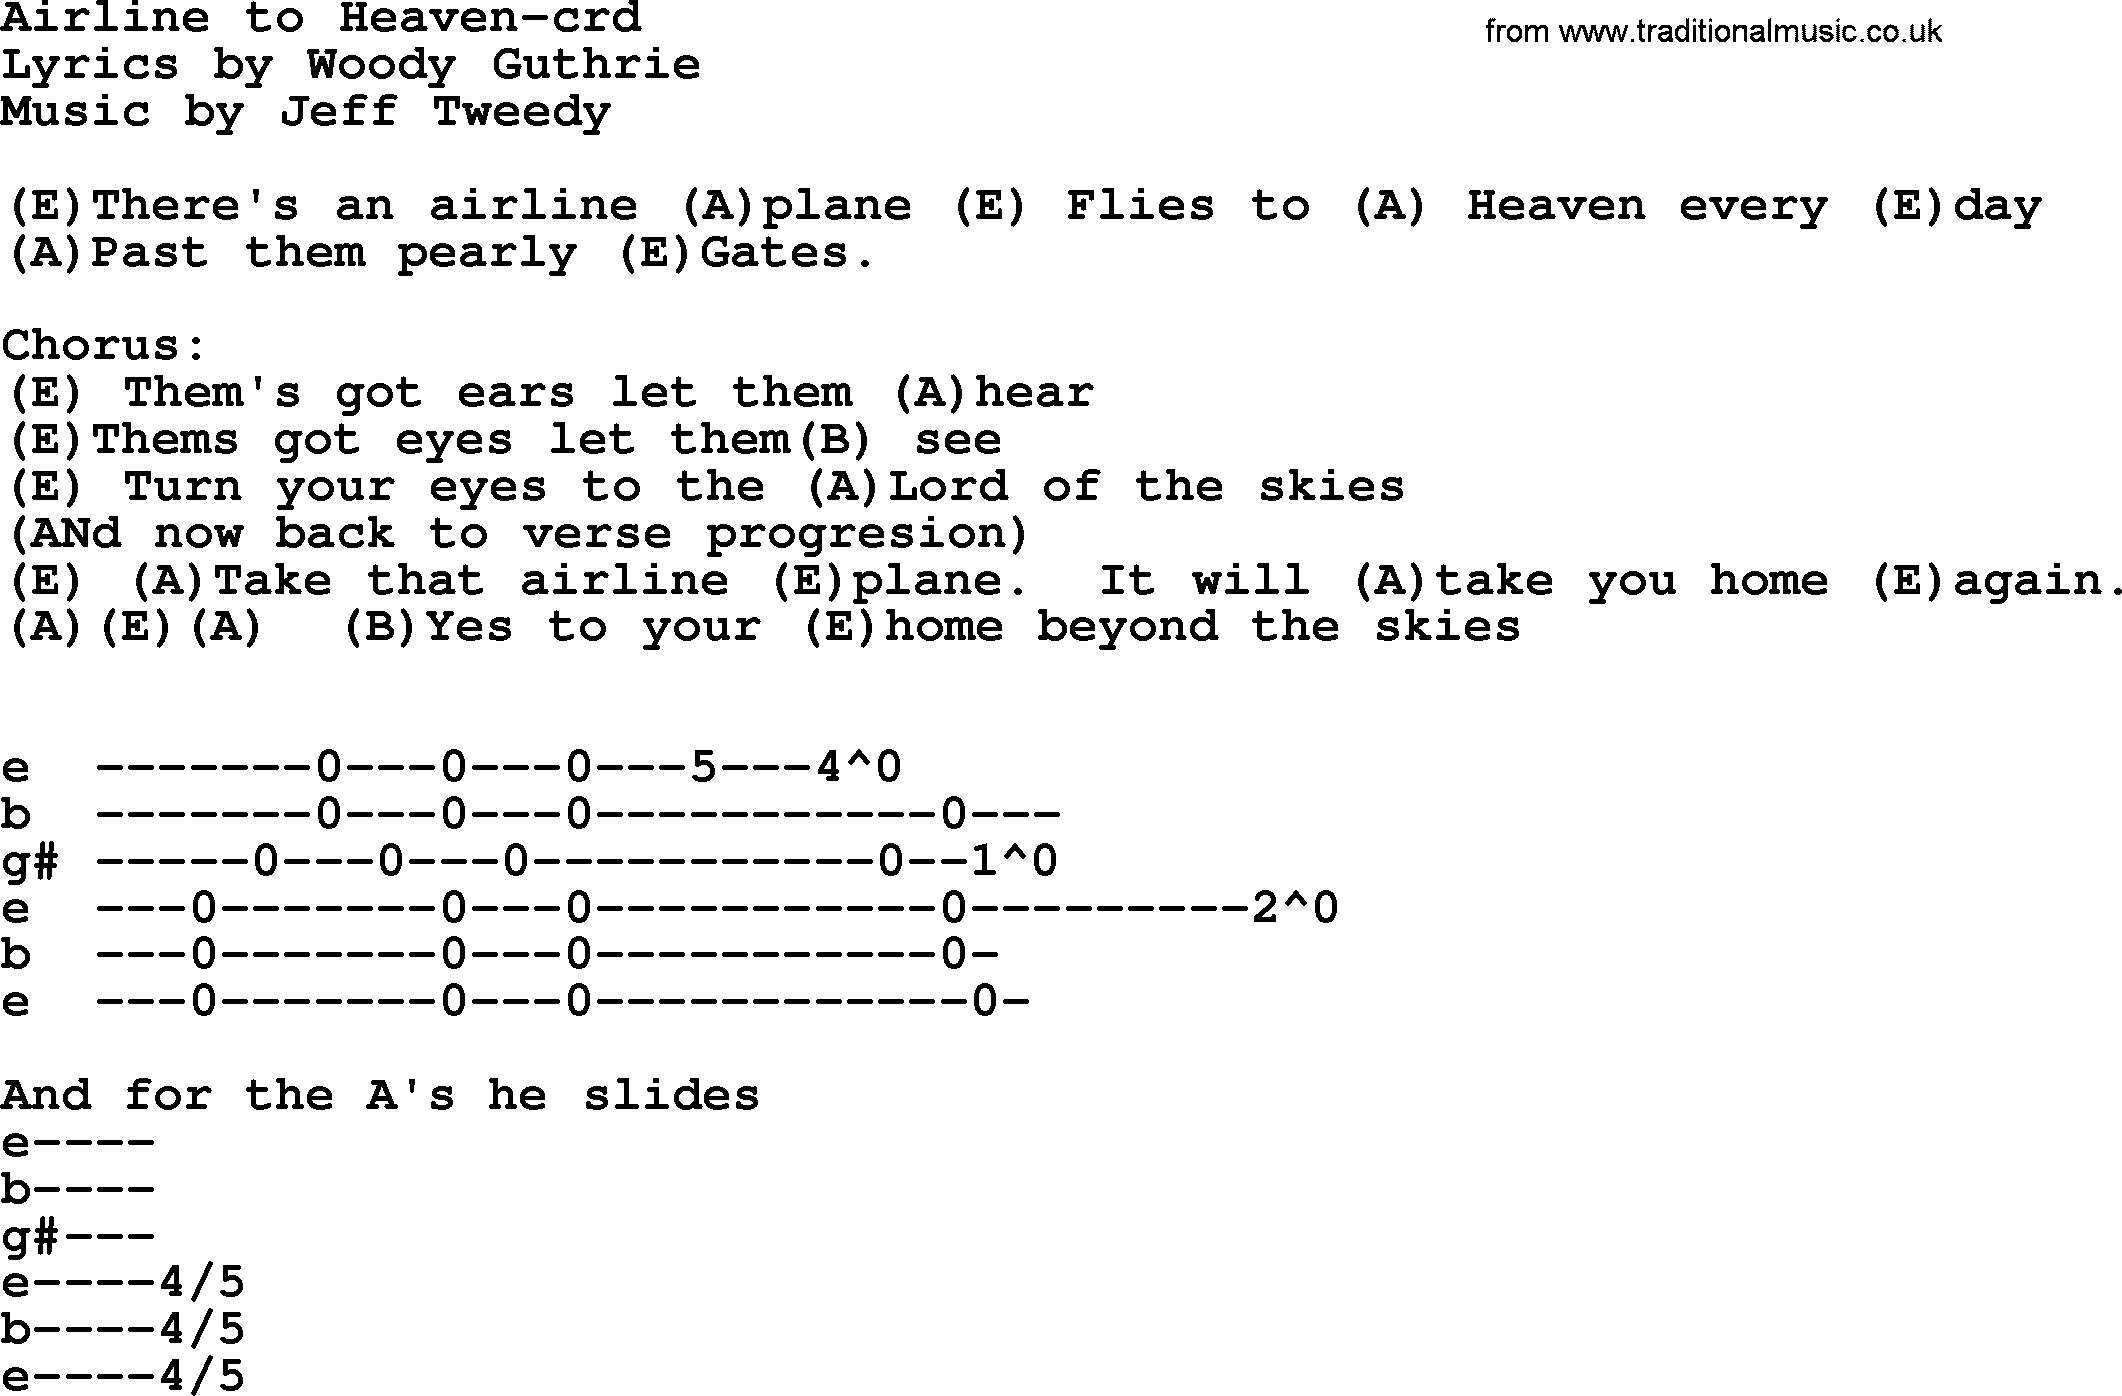 Woody Guthrie song Airline To Heaven lyrics and chords